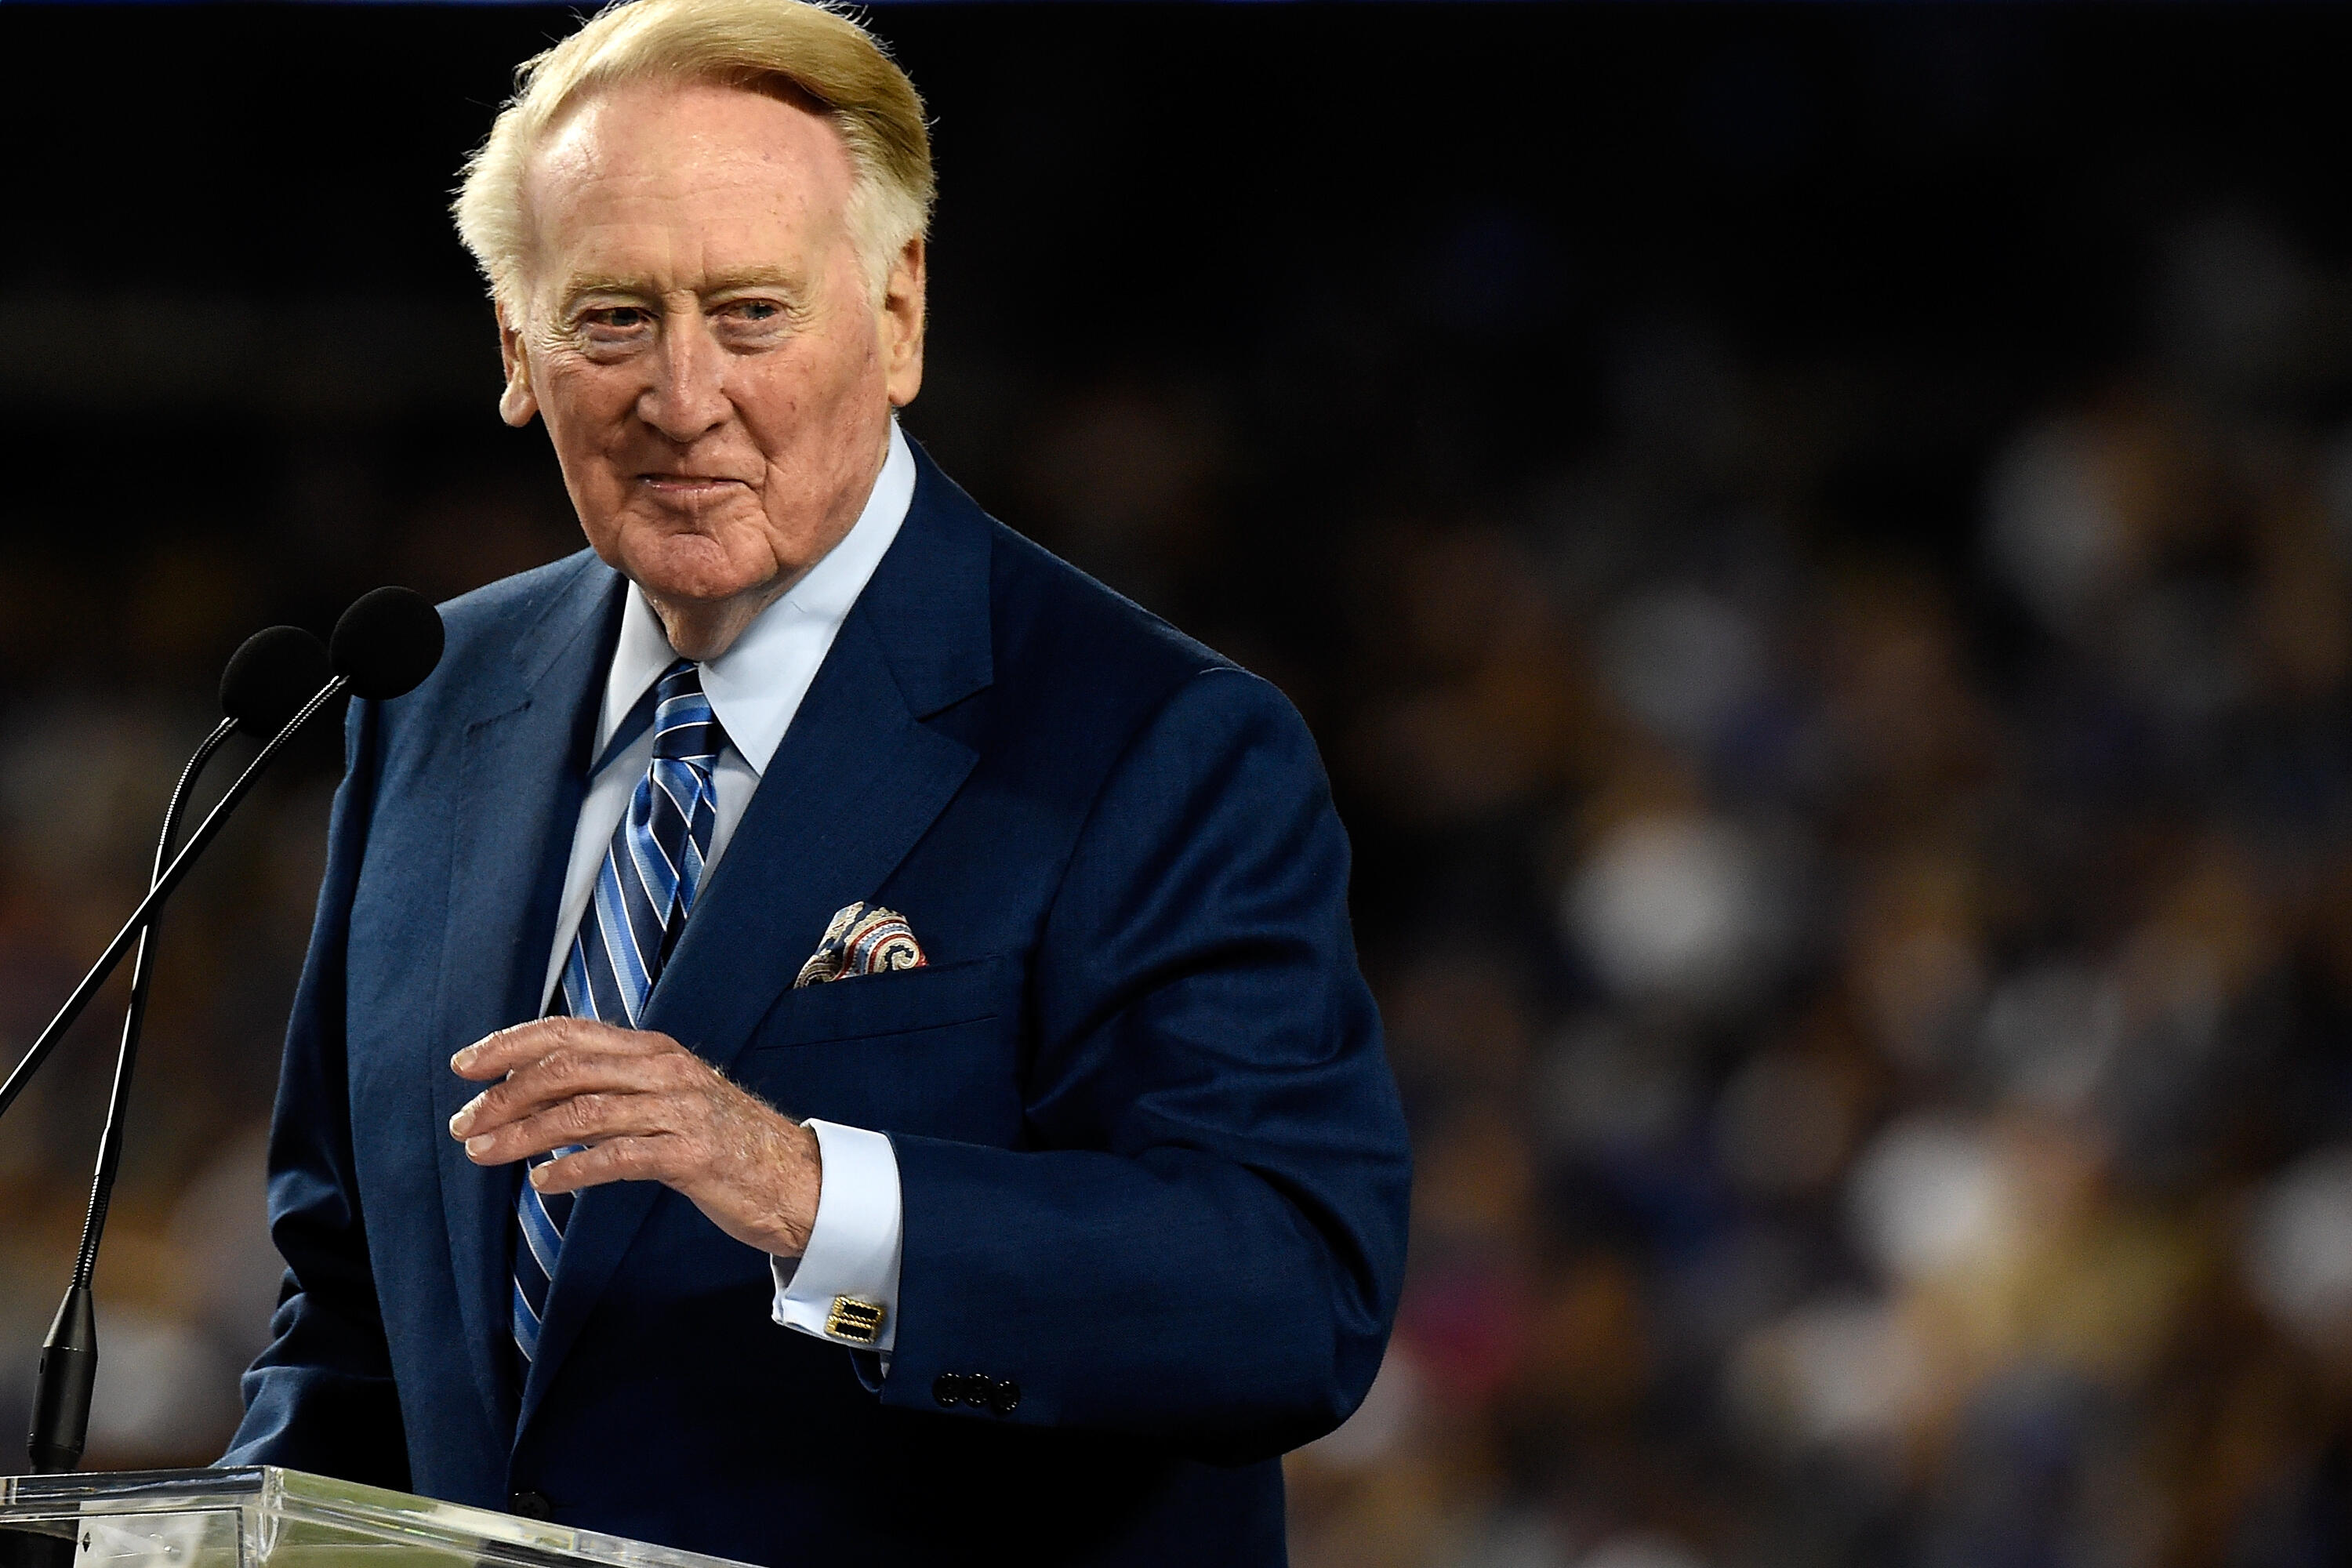 LOS ANGELES, CA - SEPTEMBER 23:  Dodgers announcer Vin Scully addresses the crowd during a retirement ceremony in his honor before the game at Dodger Stadium on September 23, 2016 in Los Angeles, California. Scully is retiring after 67 years with the Dodg